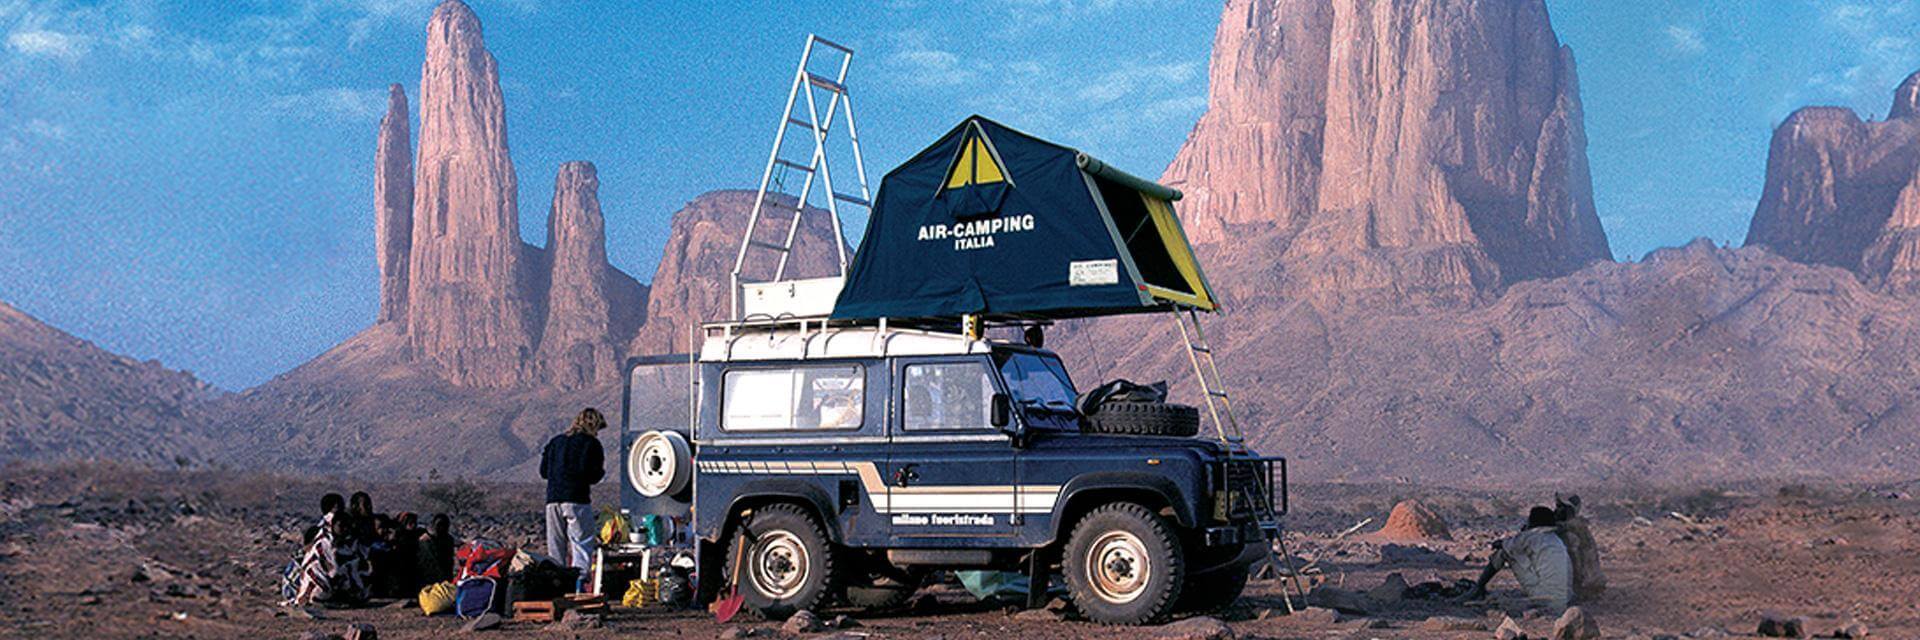 Autohome Dachzelt - Air Camping Roof Top Tents